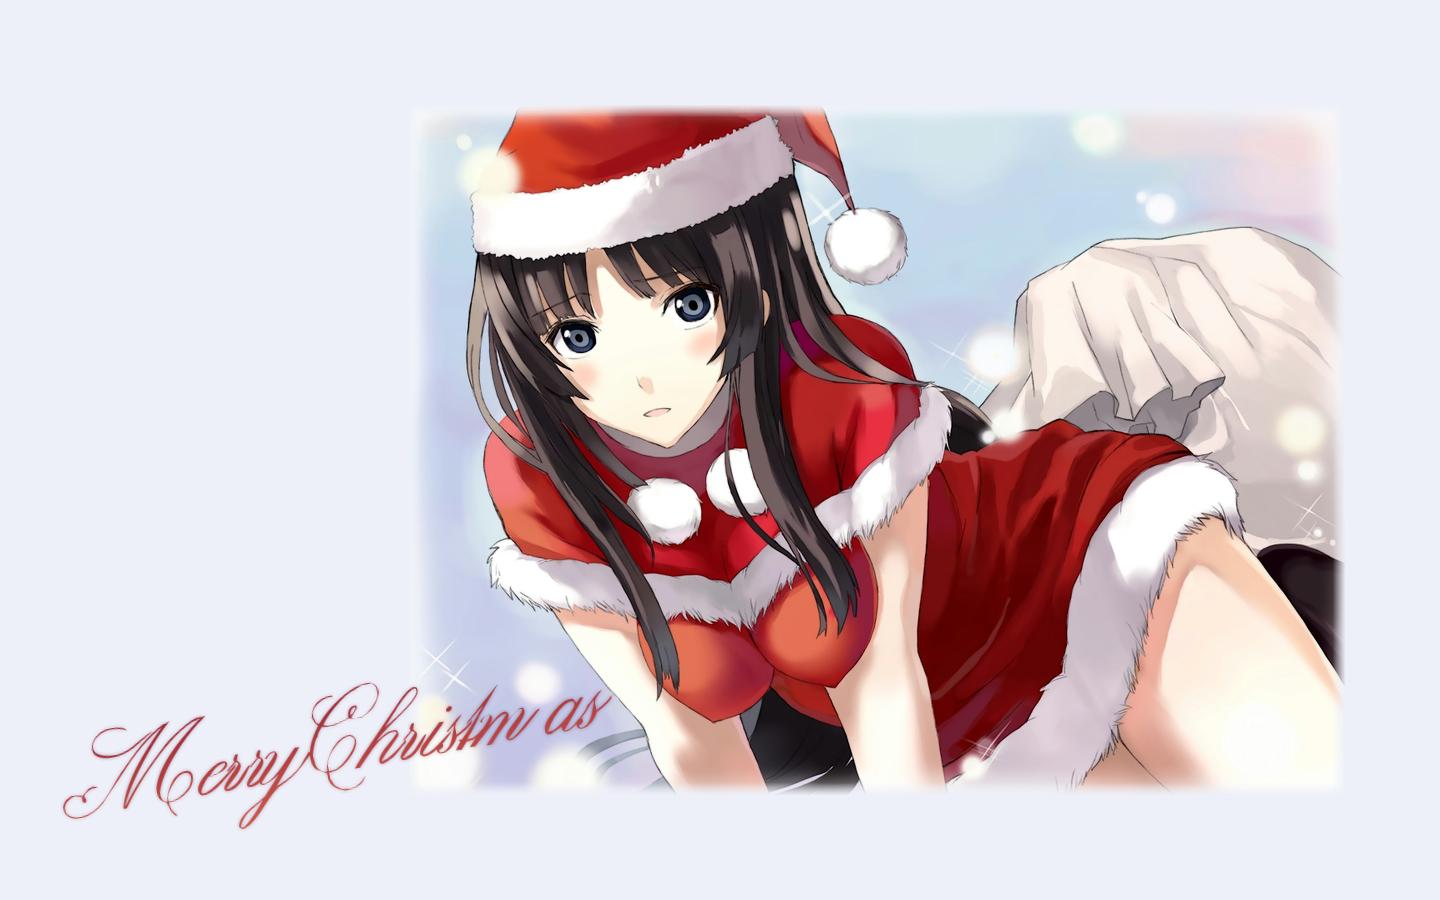 Free Download Christmas Anime Wallpapers Hd Download 1440x900 For Your Desktop Mobile Tablet Explore 58 Anime Christmas Wallpapers Anime Christmas Wallpapers Anime Christmas Wallpaper Hd Anime Merry Christmas 2020 Wallpapers